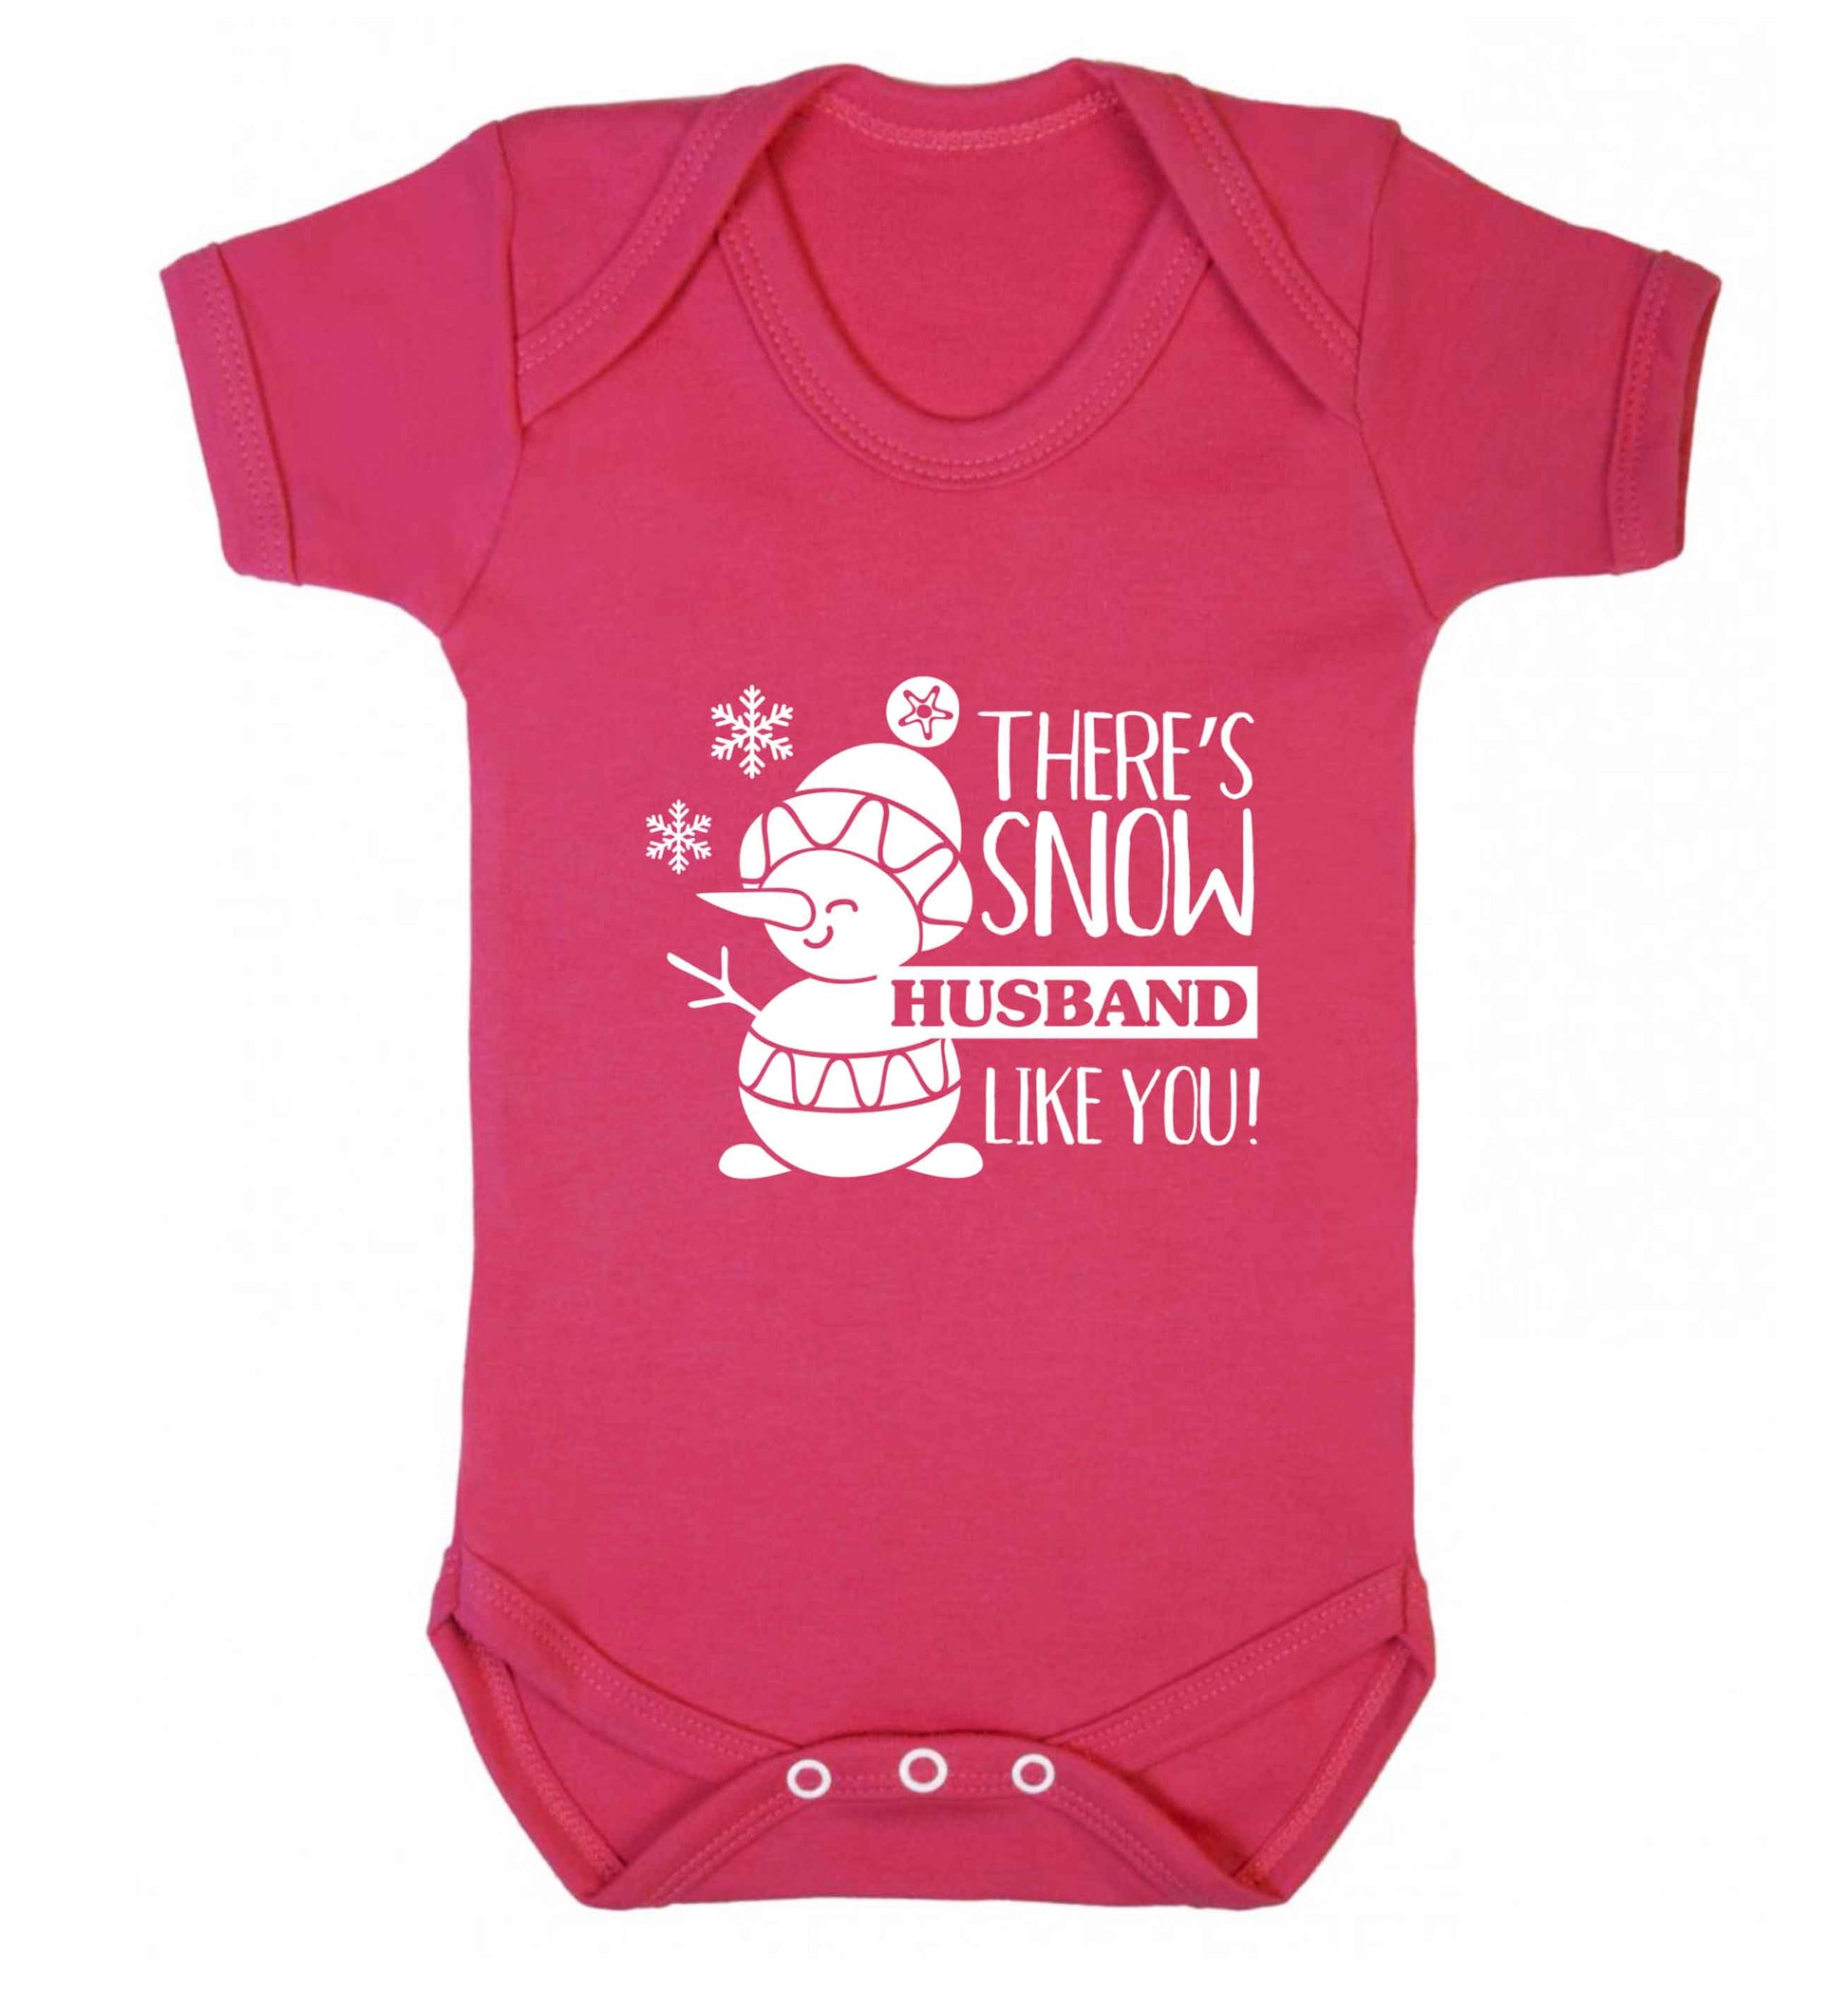 There's snow husband like you baby vest dark pink 18-24 months